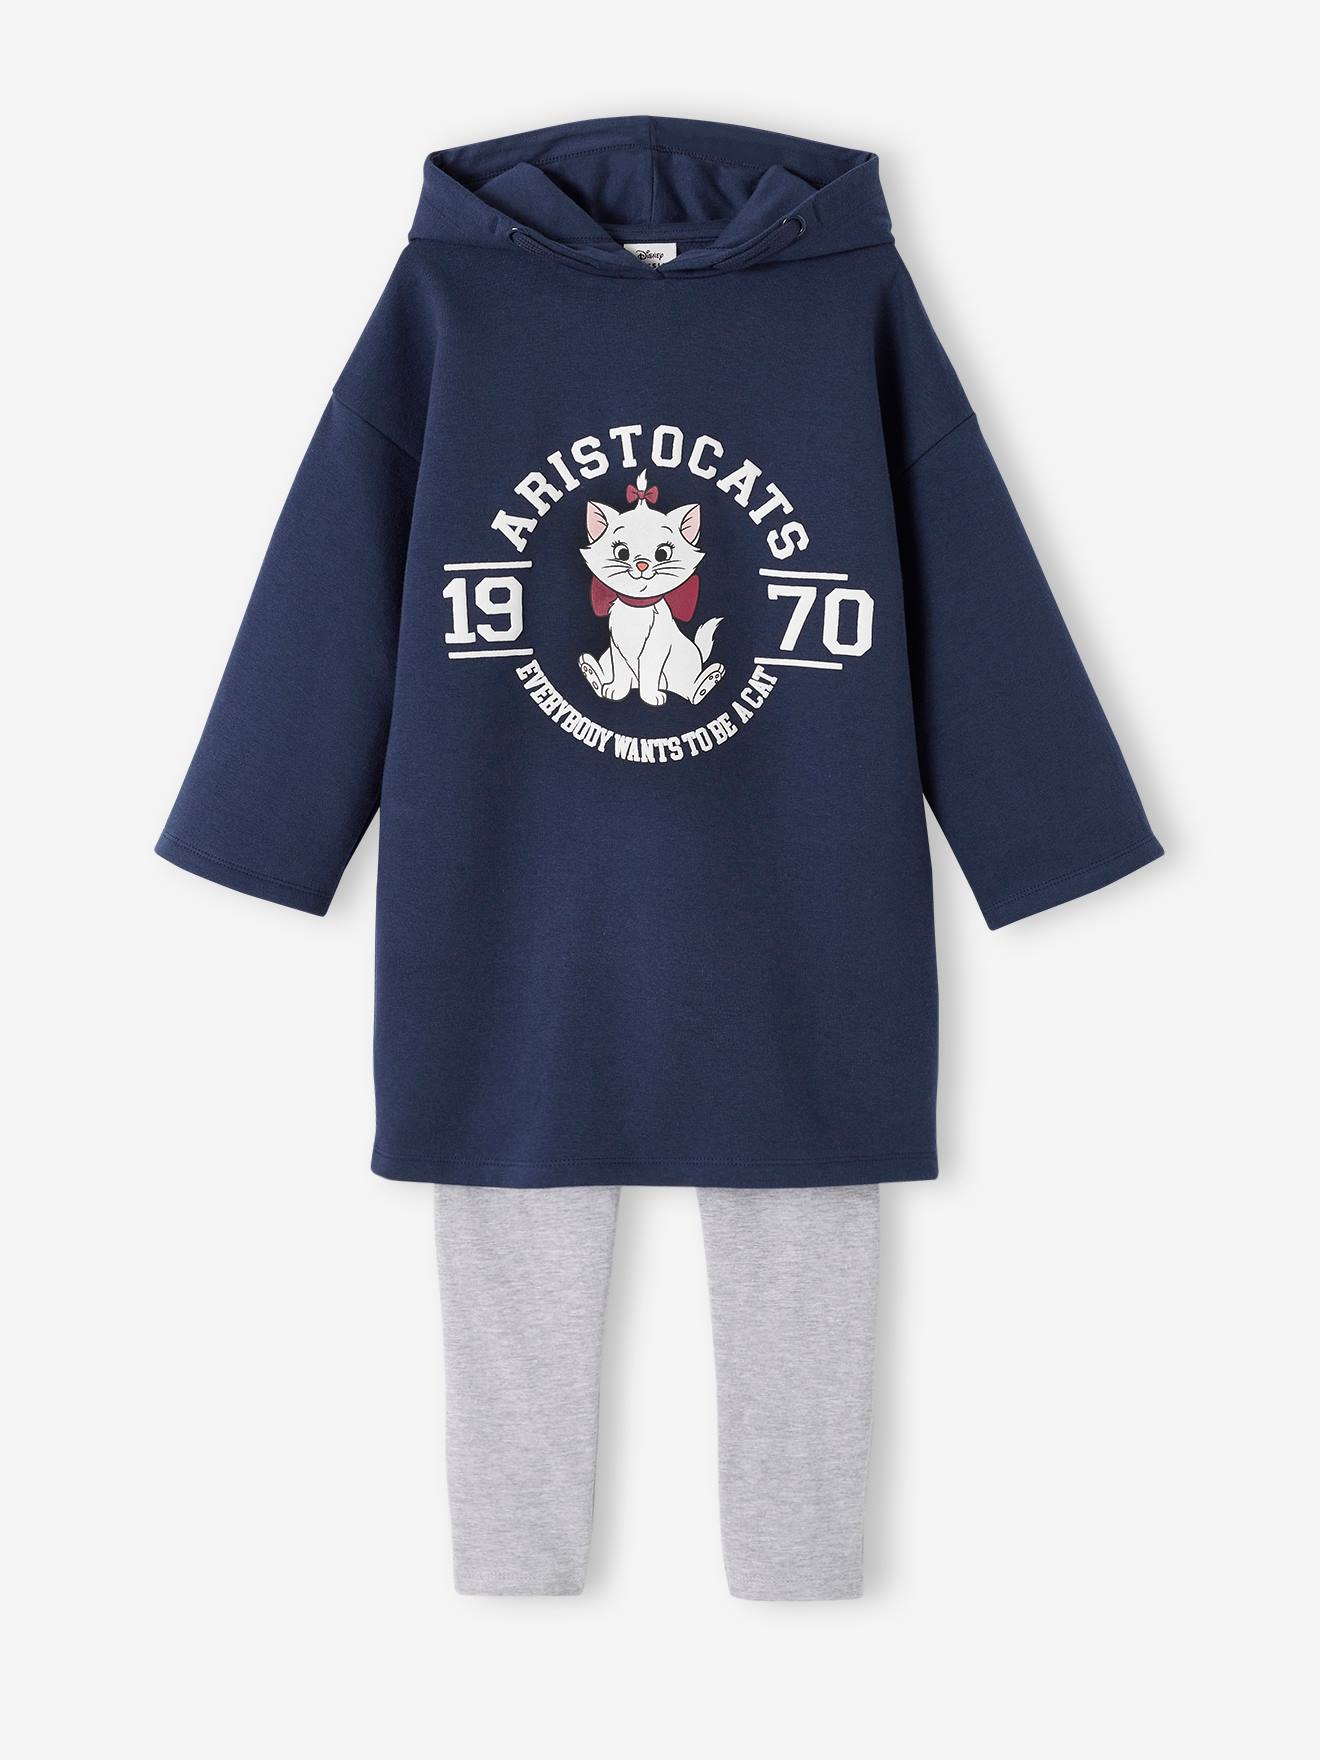 Sweatshirt-Type Dress + Leggings Outfit, Aristocats Marie by Disney(r), for Girls navy blue